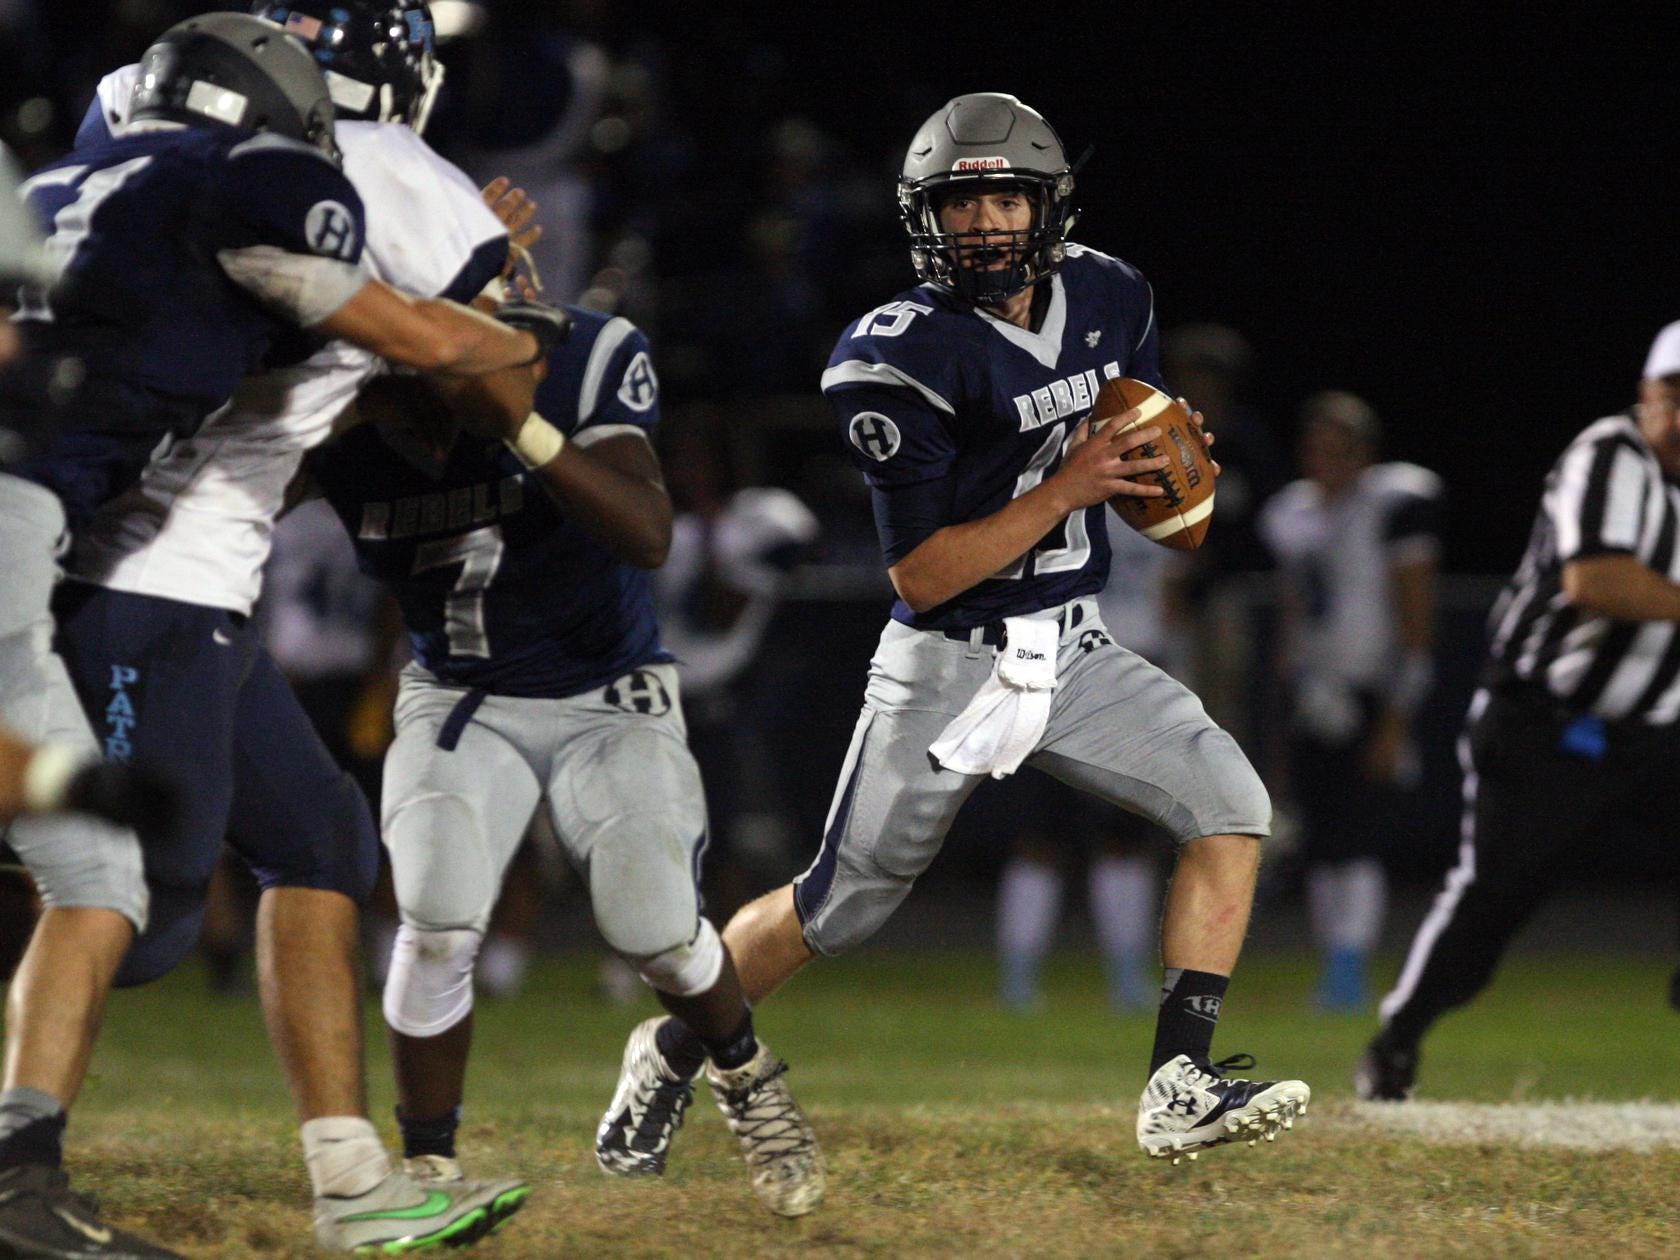 Quarterback Mark Iacobino, #15 Howell, scrambles with the ball as the Freehold Township defense chases him in a football game Friday, September 25, 2015, at Howell High School.